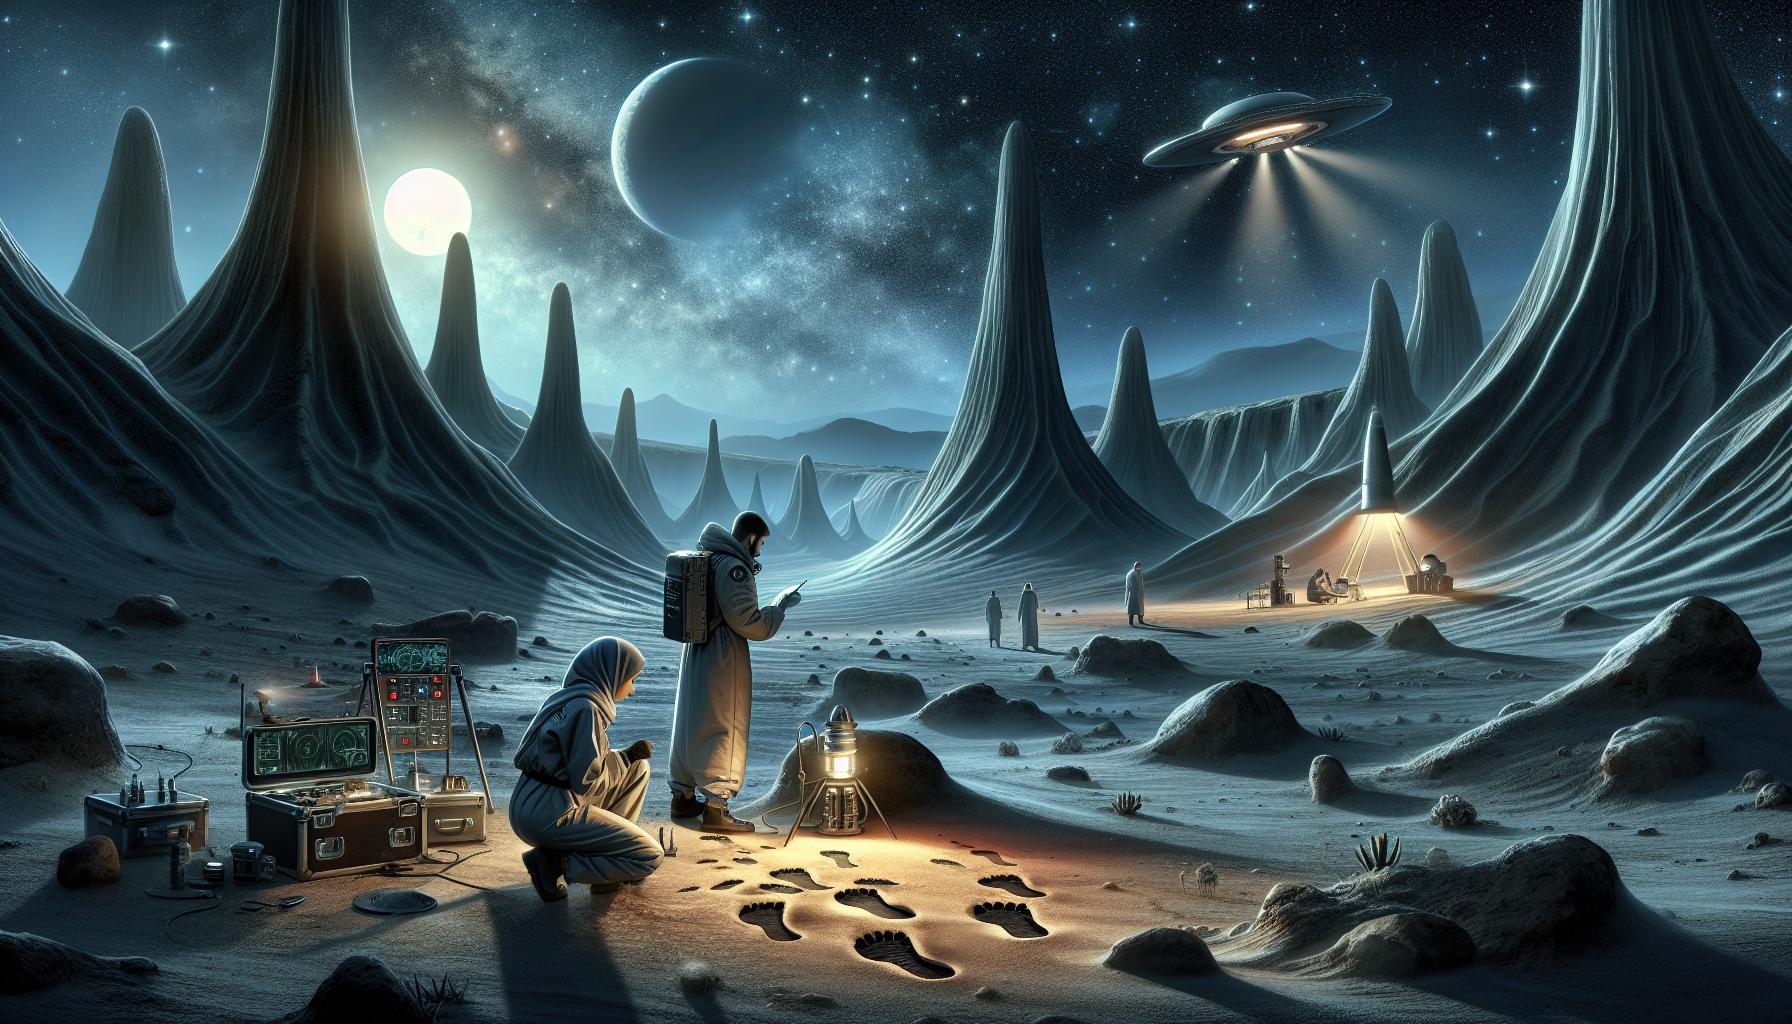 Pursuit of‌ Alien Life: Examining ‌the believability of Extraterrestrial Visitations